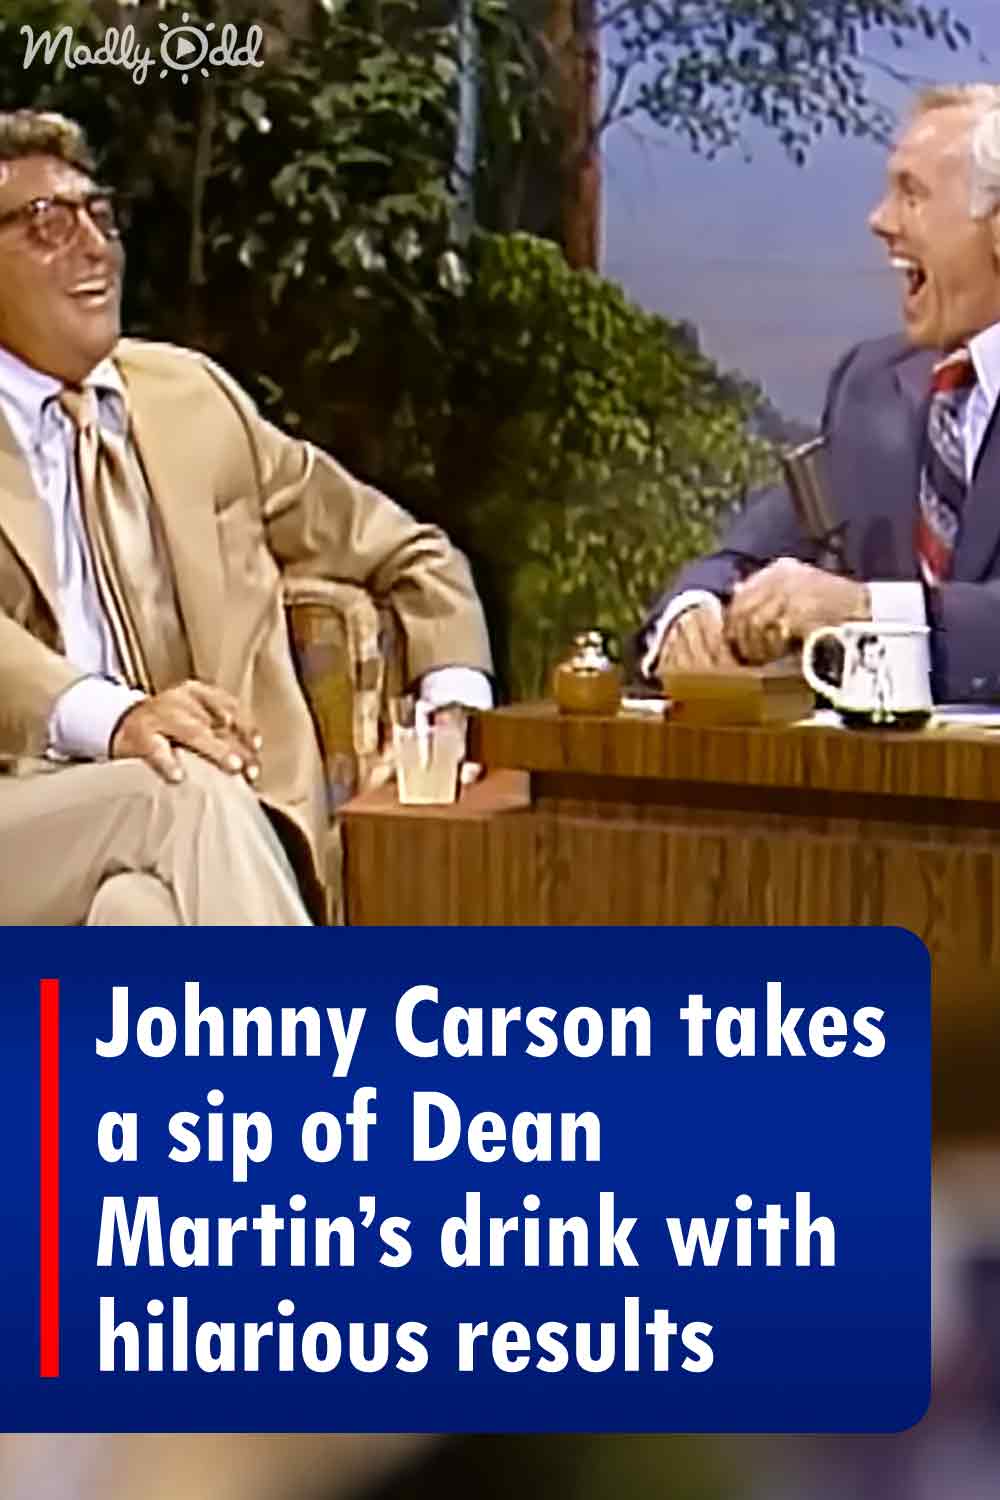 Johnny Carson takes a sip of Dean Martin’s drink with hilarious results